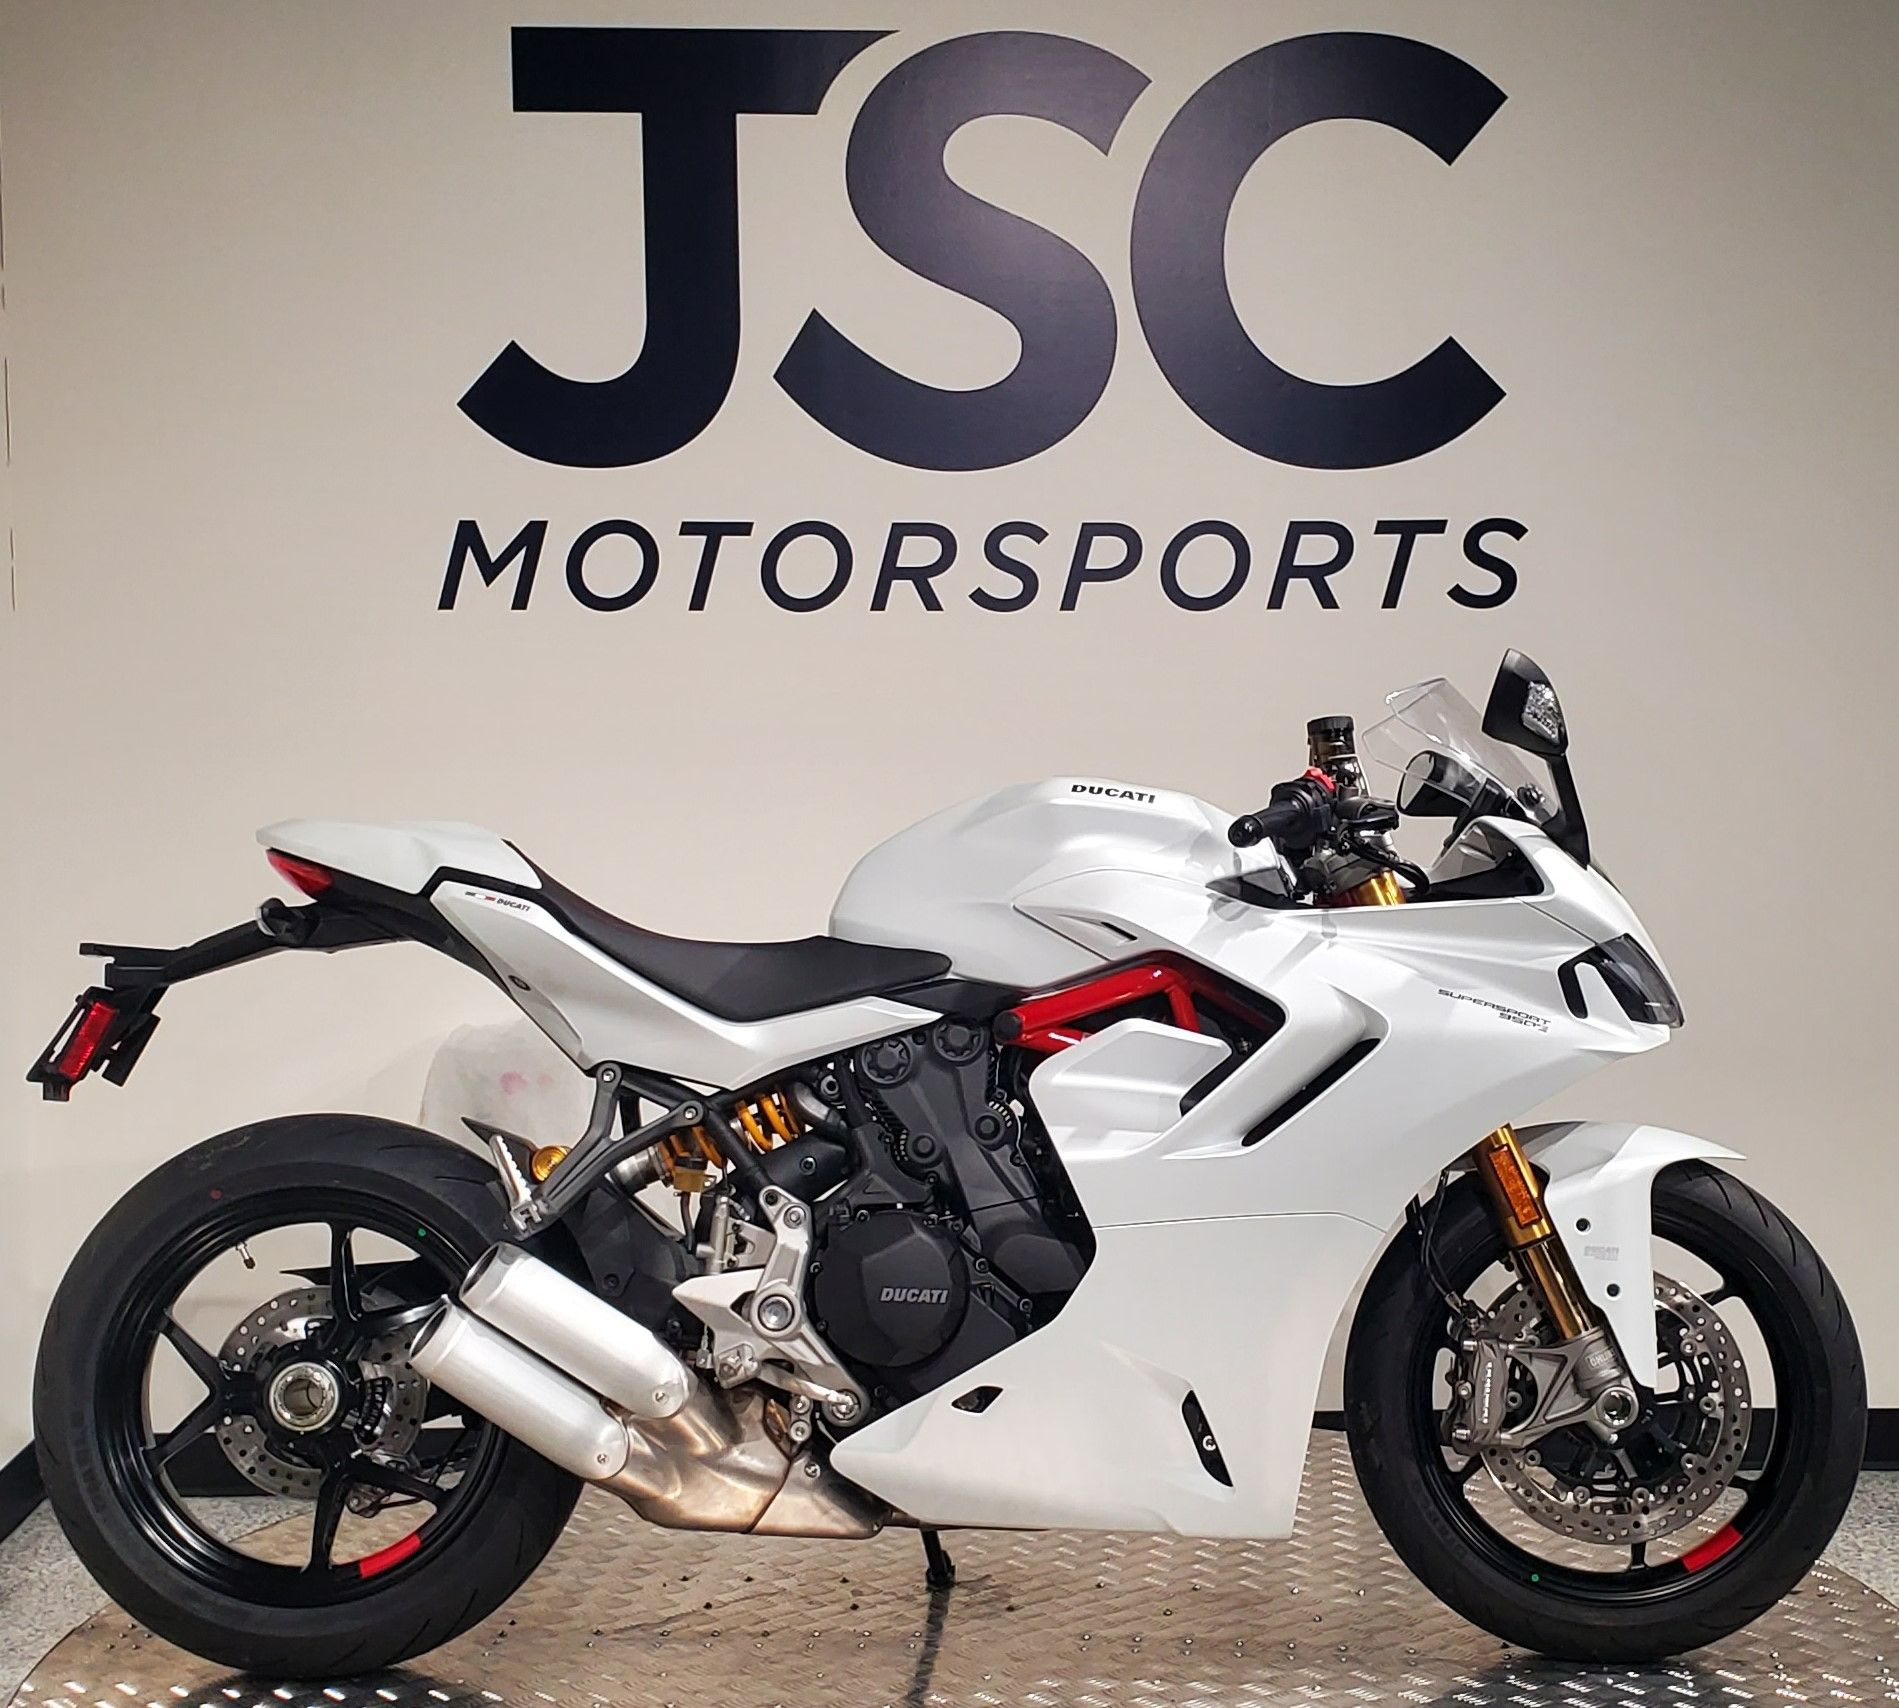 2023 Ducati SuperSport 950 S in Albany, New York - Photo 1